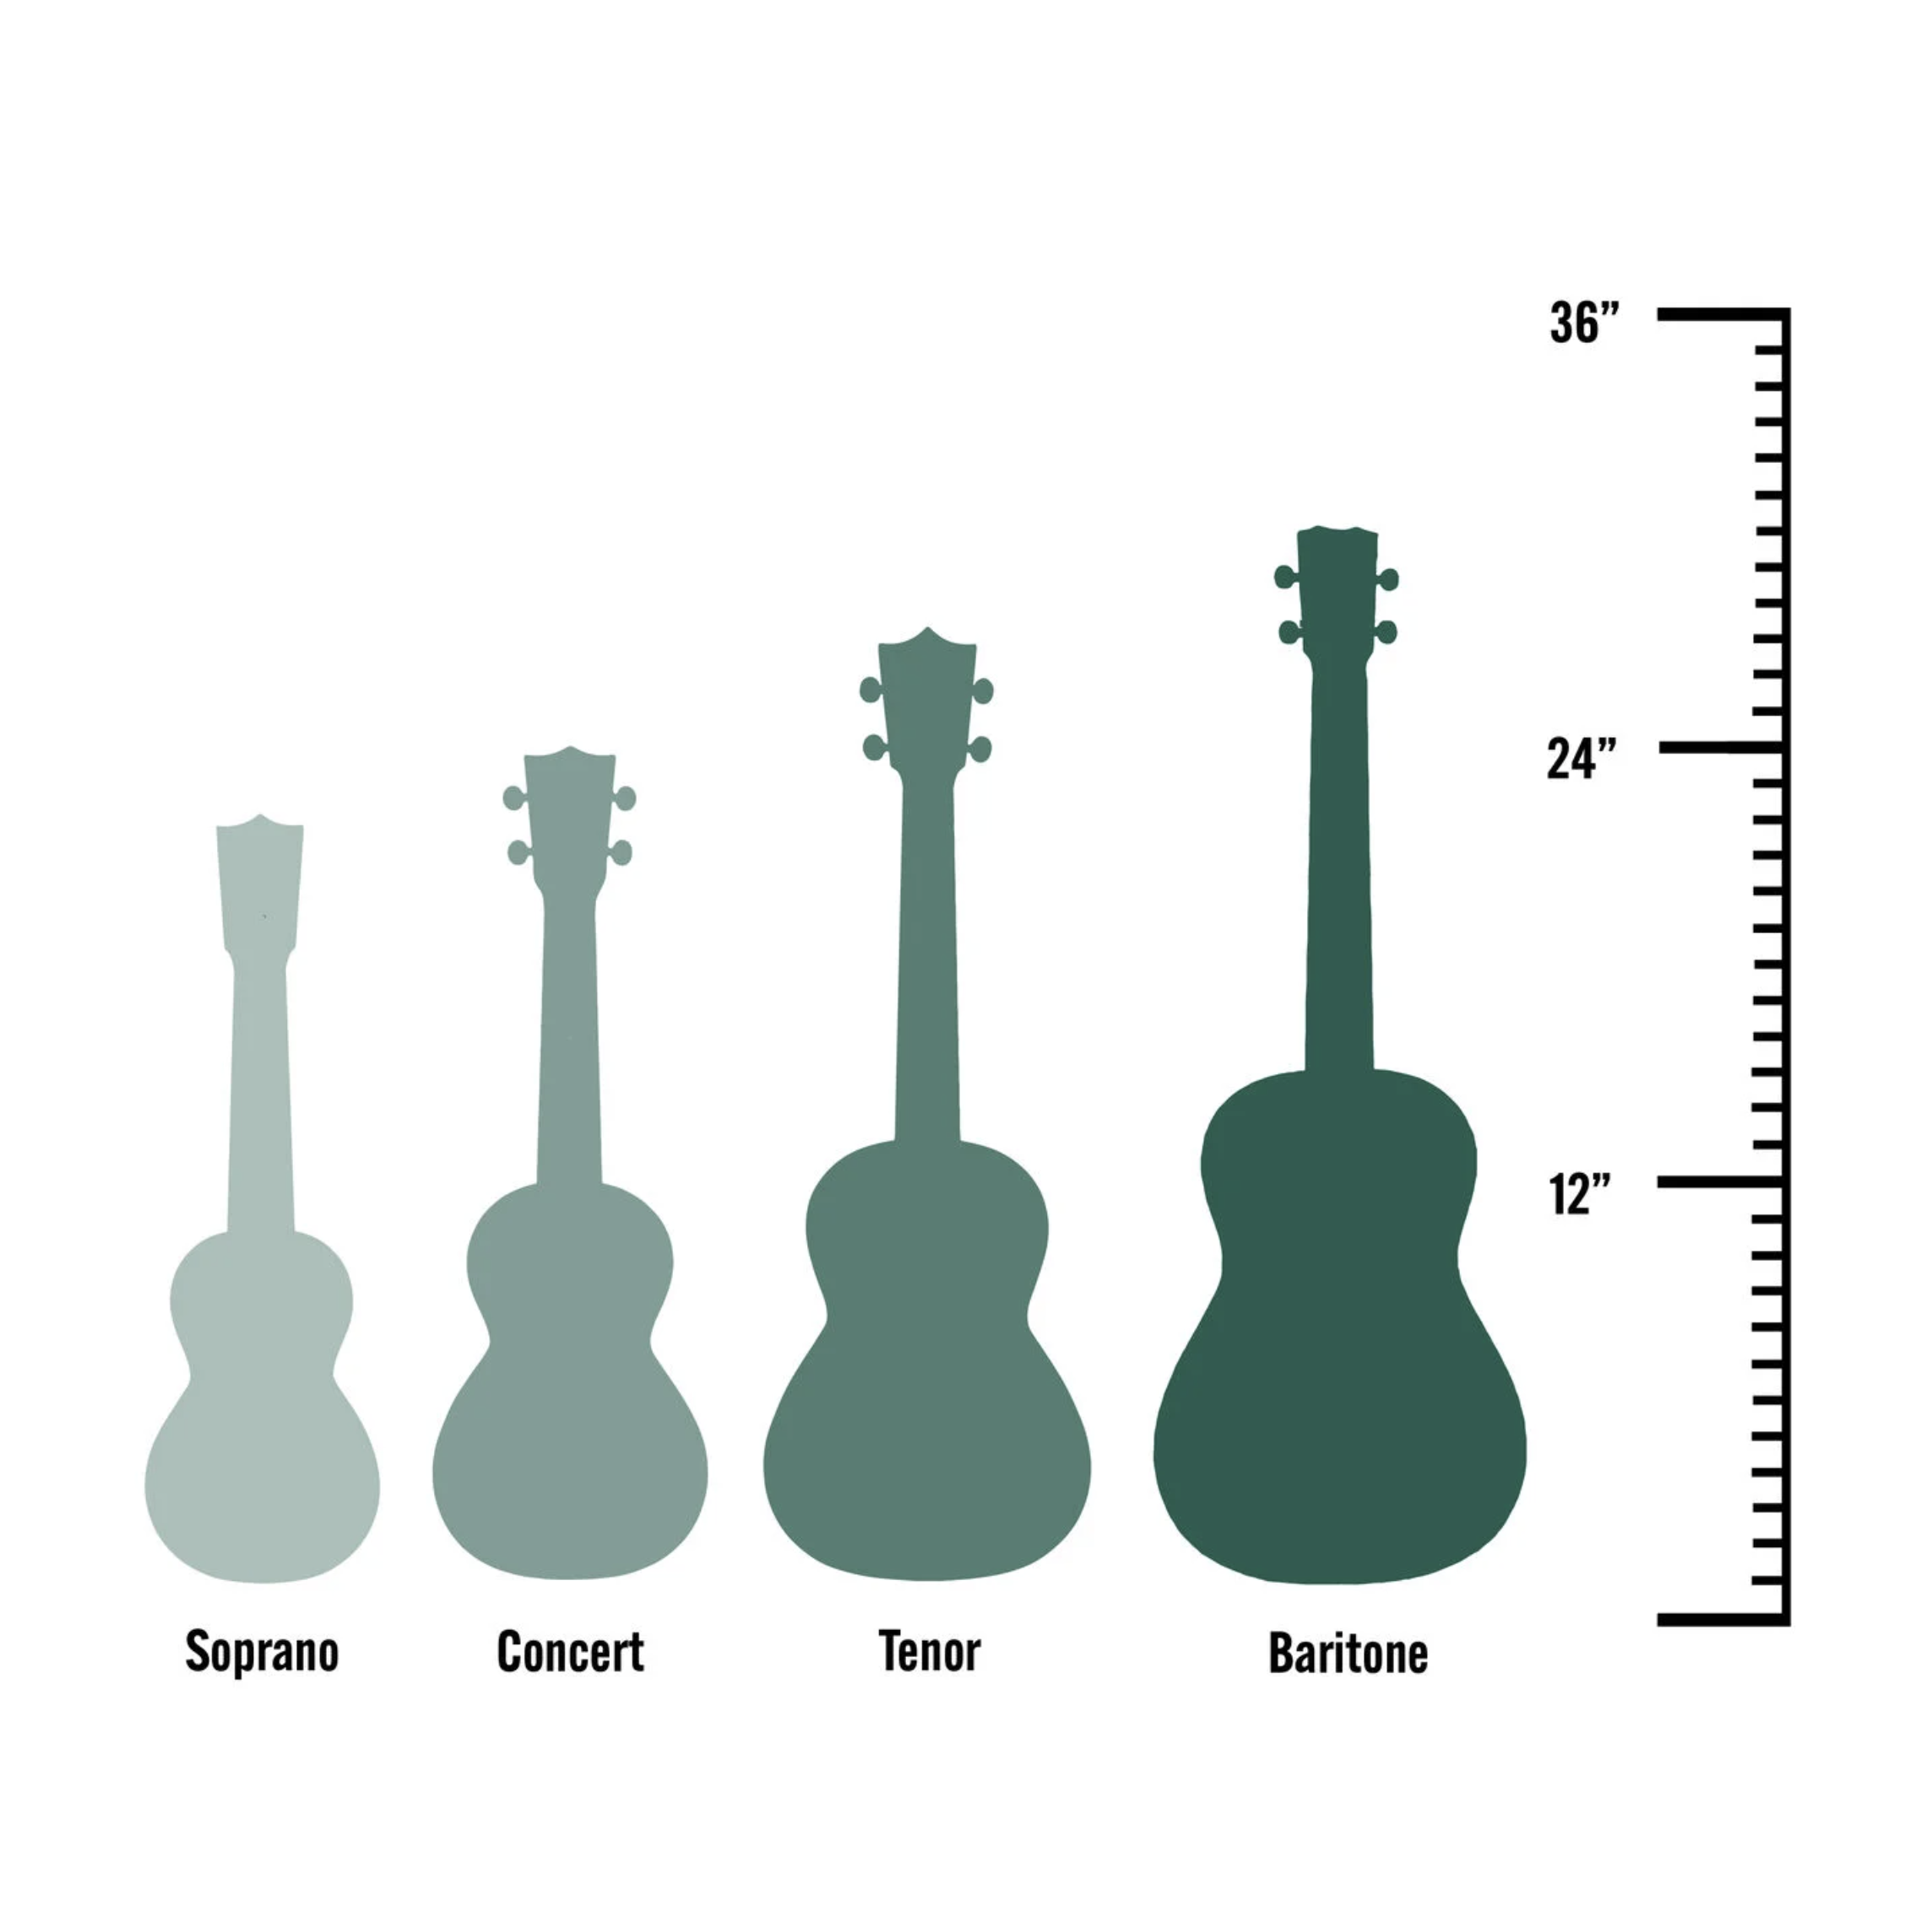 Chart comparing sizes of different ukuleles: soprano, concert, tenor, baritone. Image by Martin Guitar company